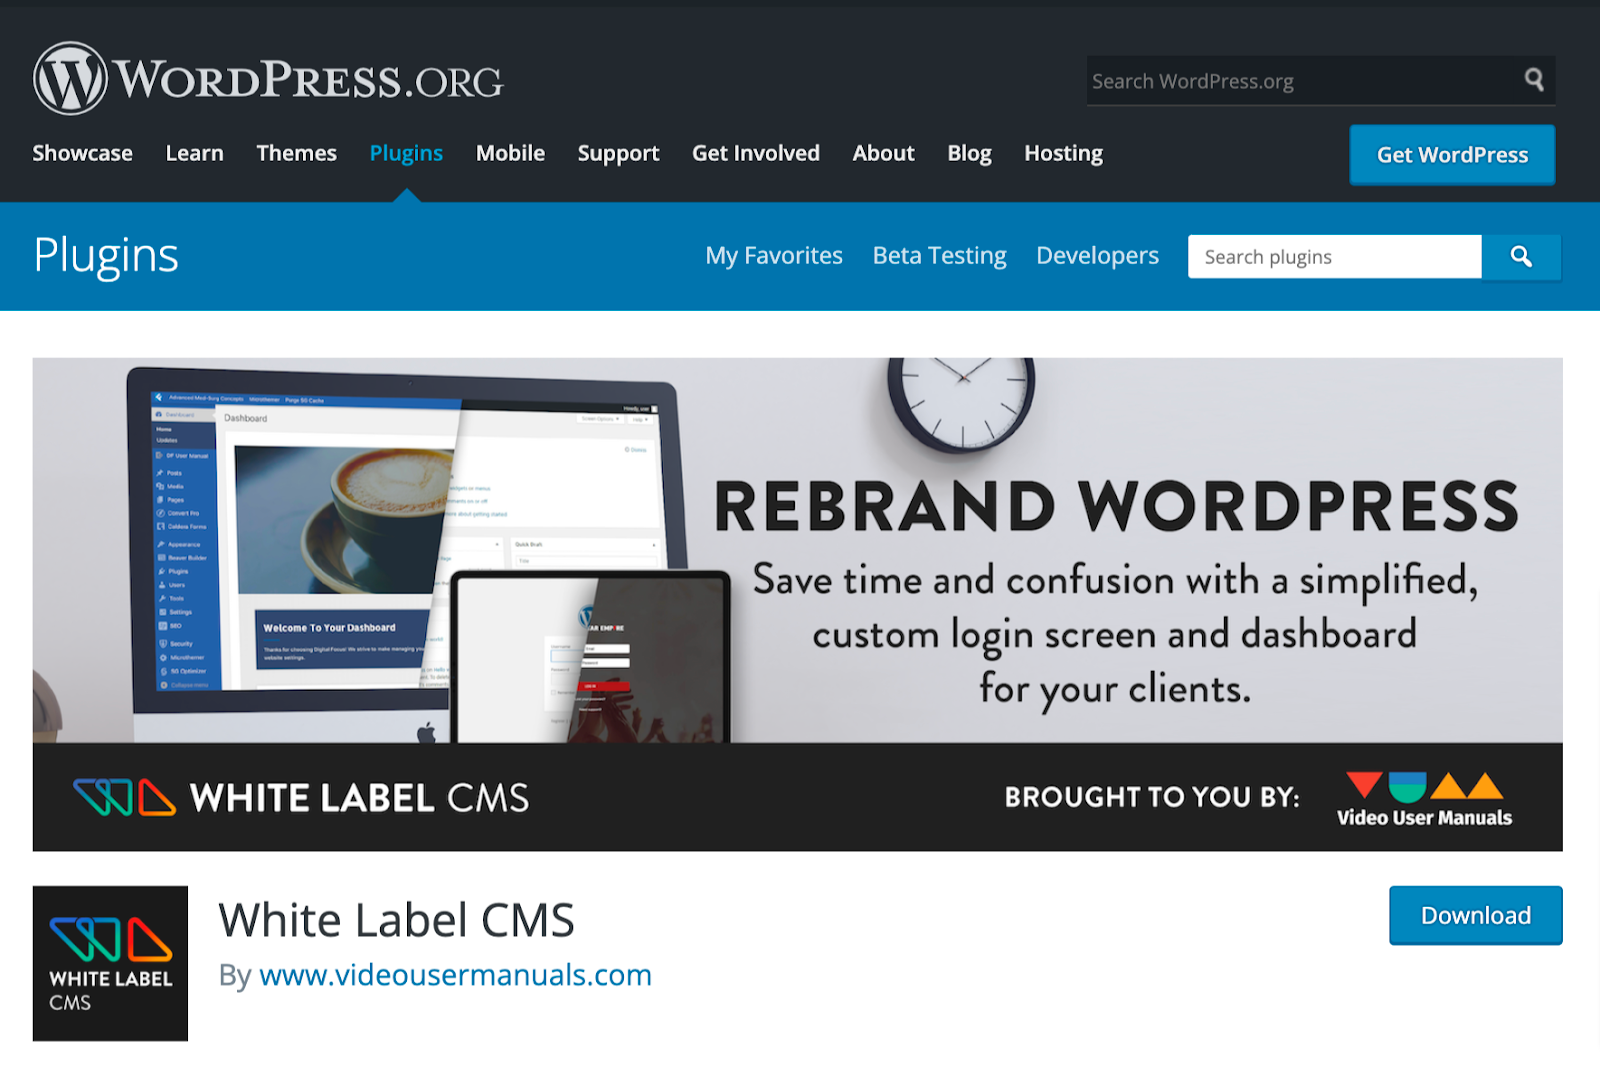 Create a customized WordPress dashboard with the White Label CMS plugin